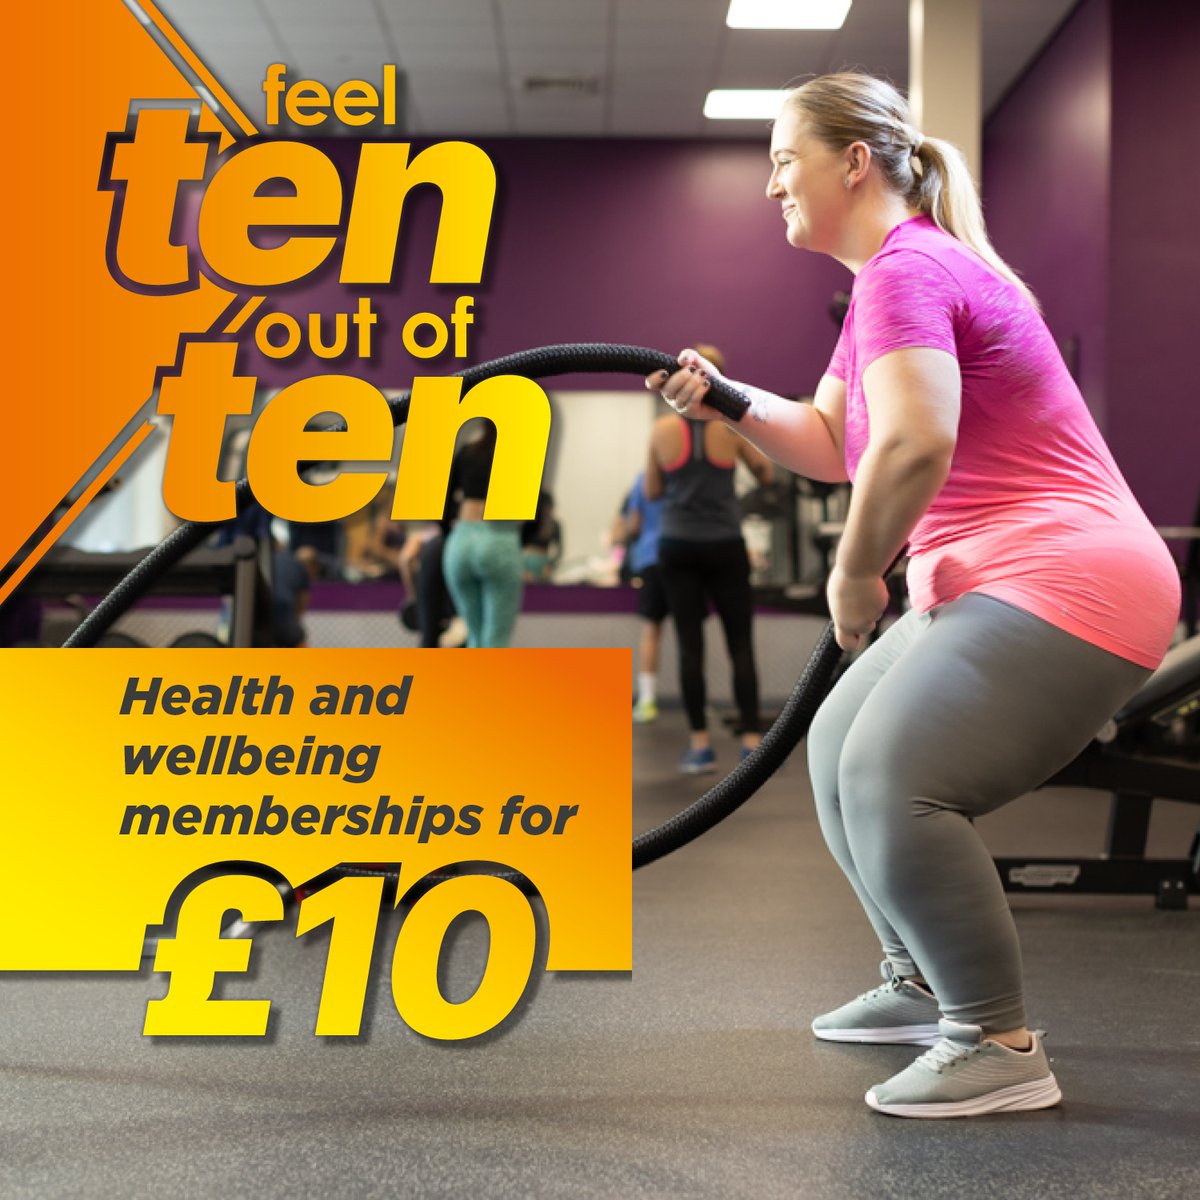 Feel ten out of ten for less 🙌 This May, get your first month's membership for just £10 - saving up to £23.50! Find out more about joining our health and wellbeing community here 👇 livewirewarrington.co.uk/ten/